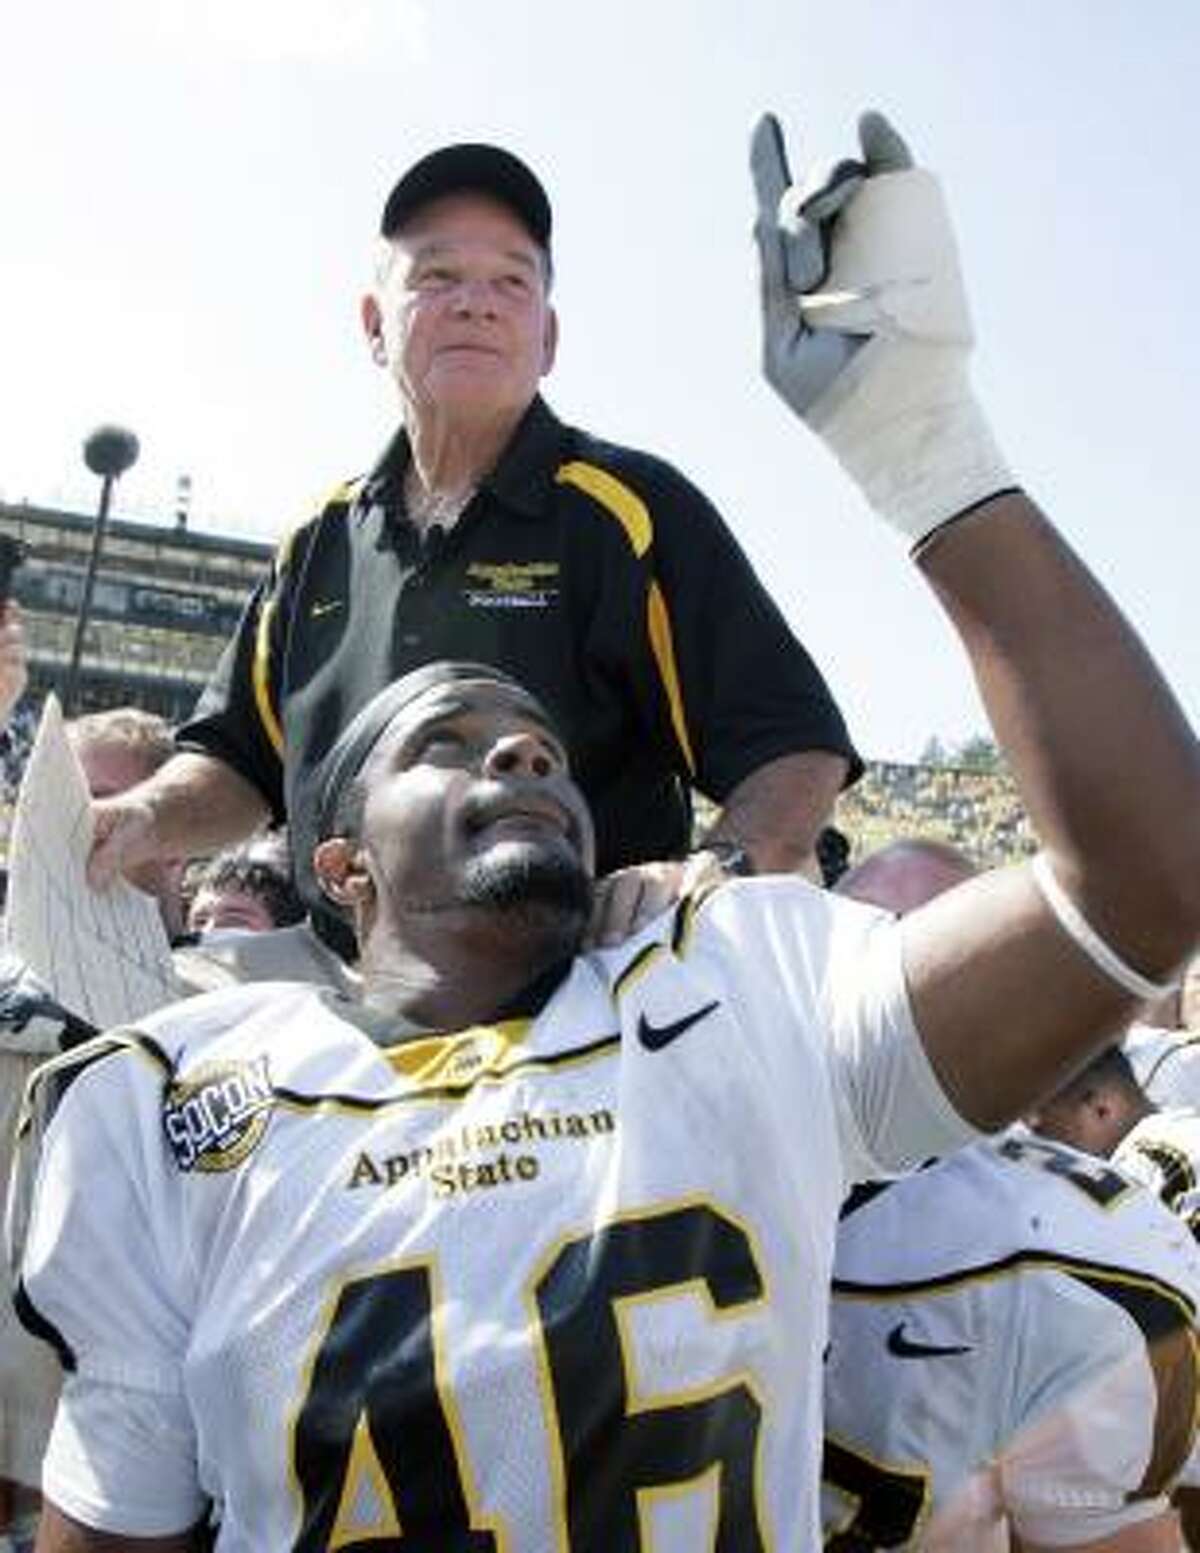 Tony Robertson and his teammates give Appalachian State coach Jerry Moore the ride of his life.